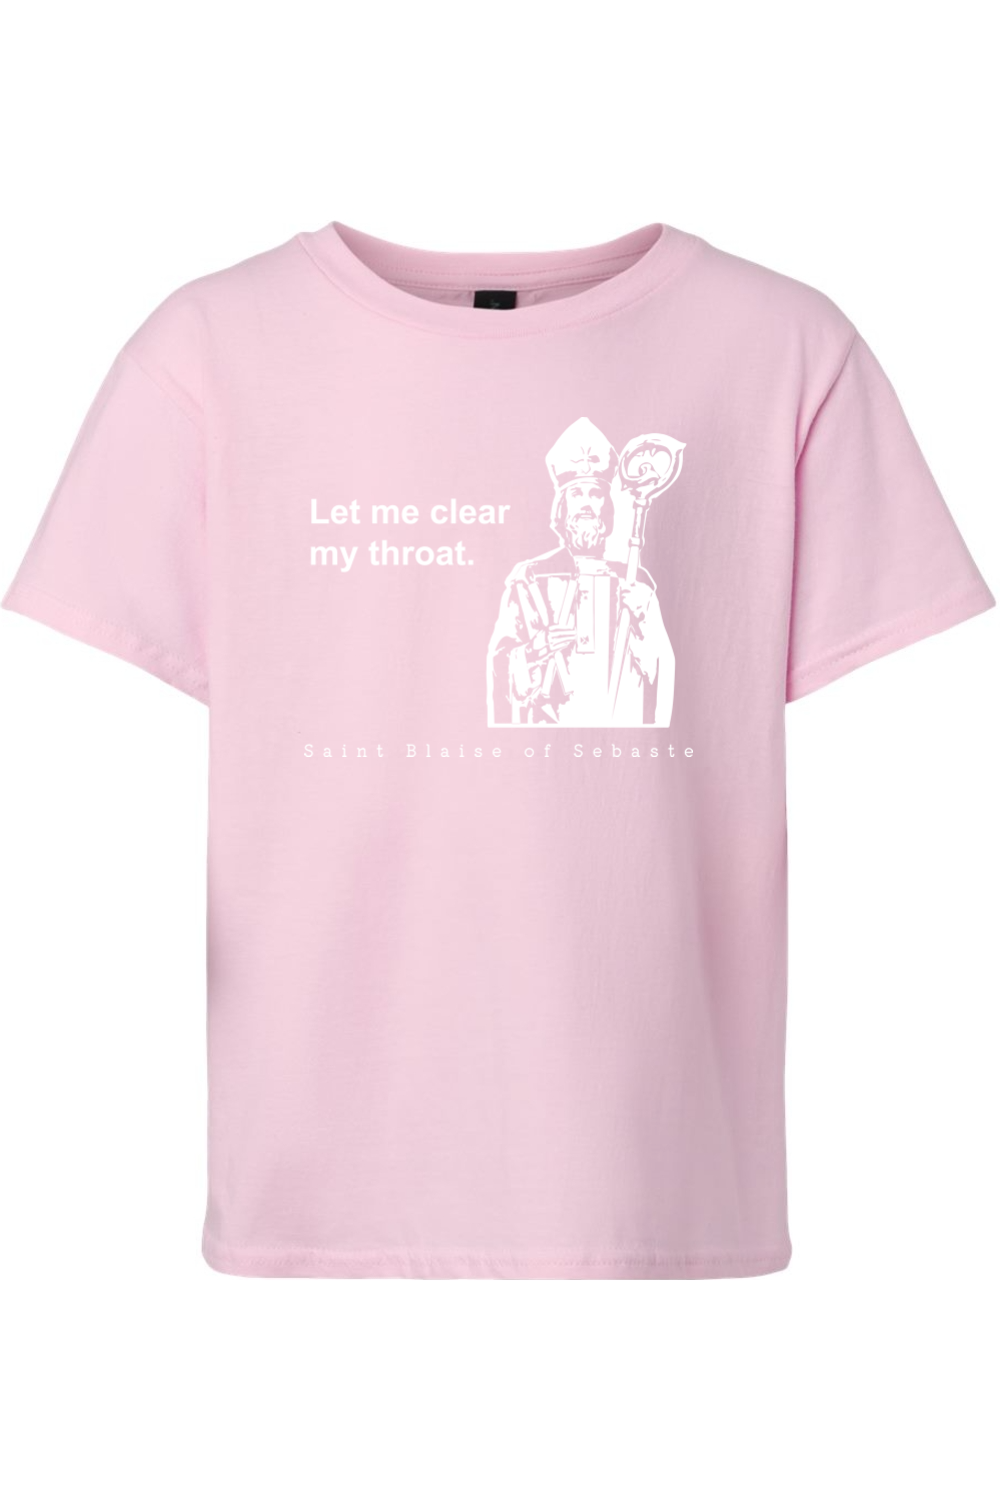 Let Me Clear My Throat - St Blaise of Sebaste Youth T-Shirt